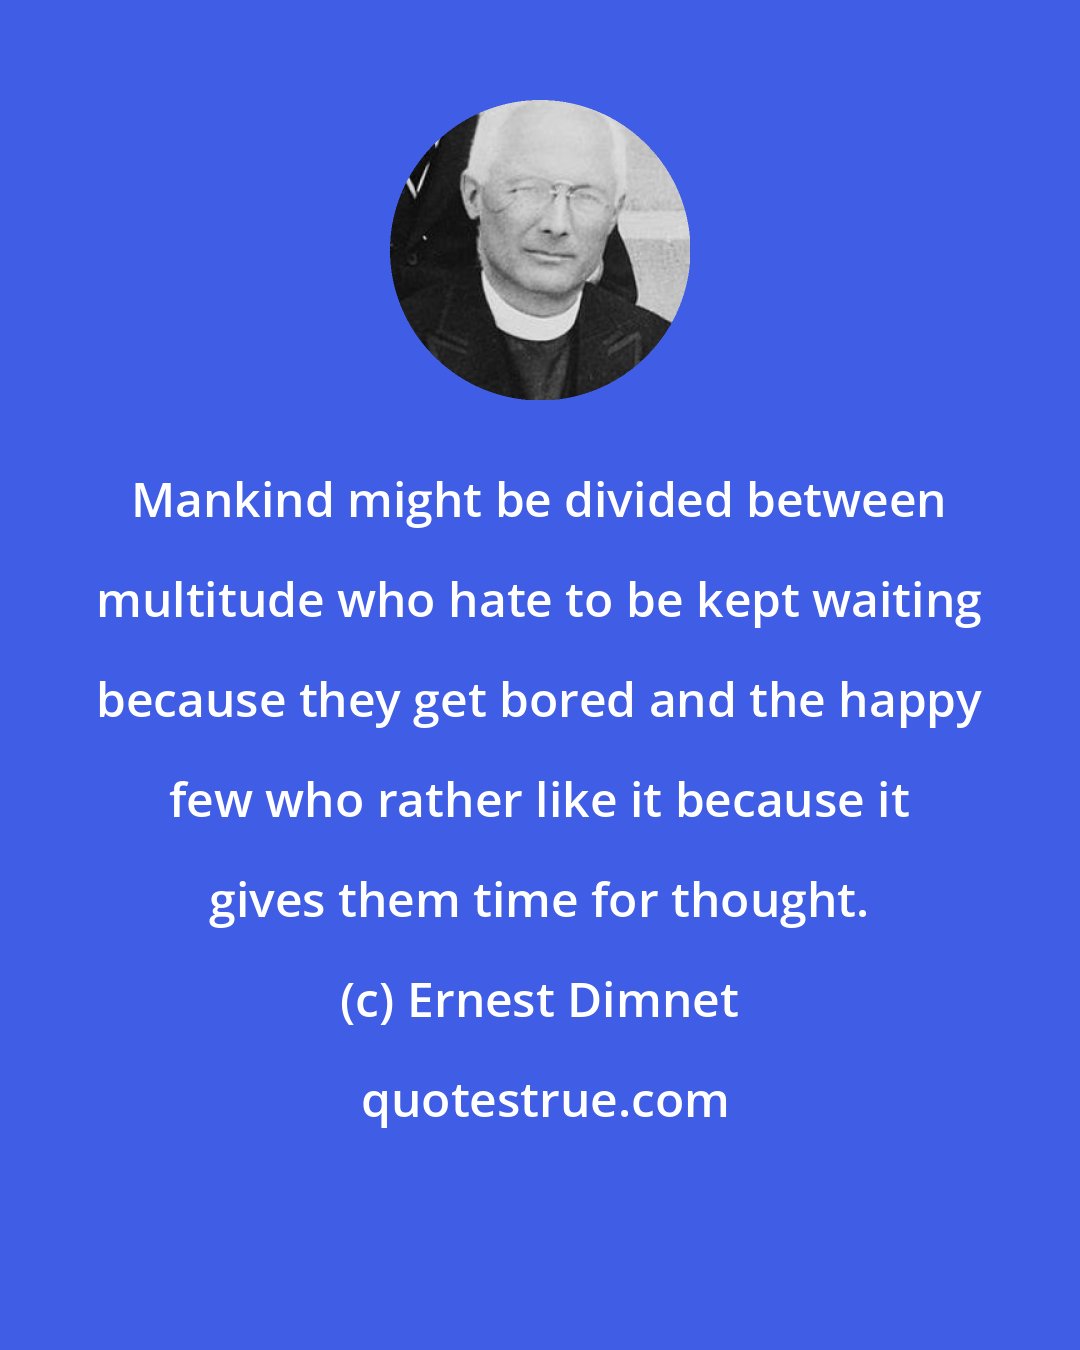 Ernest Dimnet: Mankind might be divided between multitude who hate to be kept waiting because they get bored and the happy few who rather like it because it gives them time for thought.